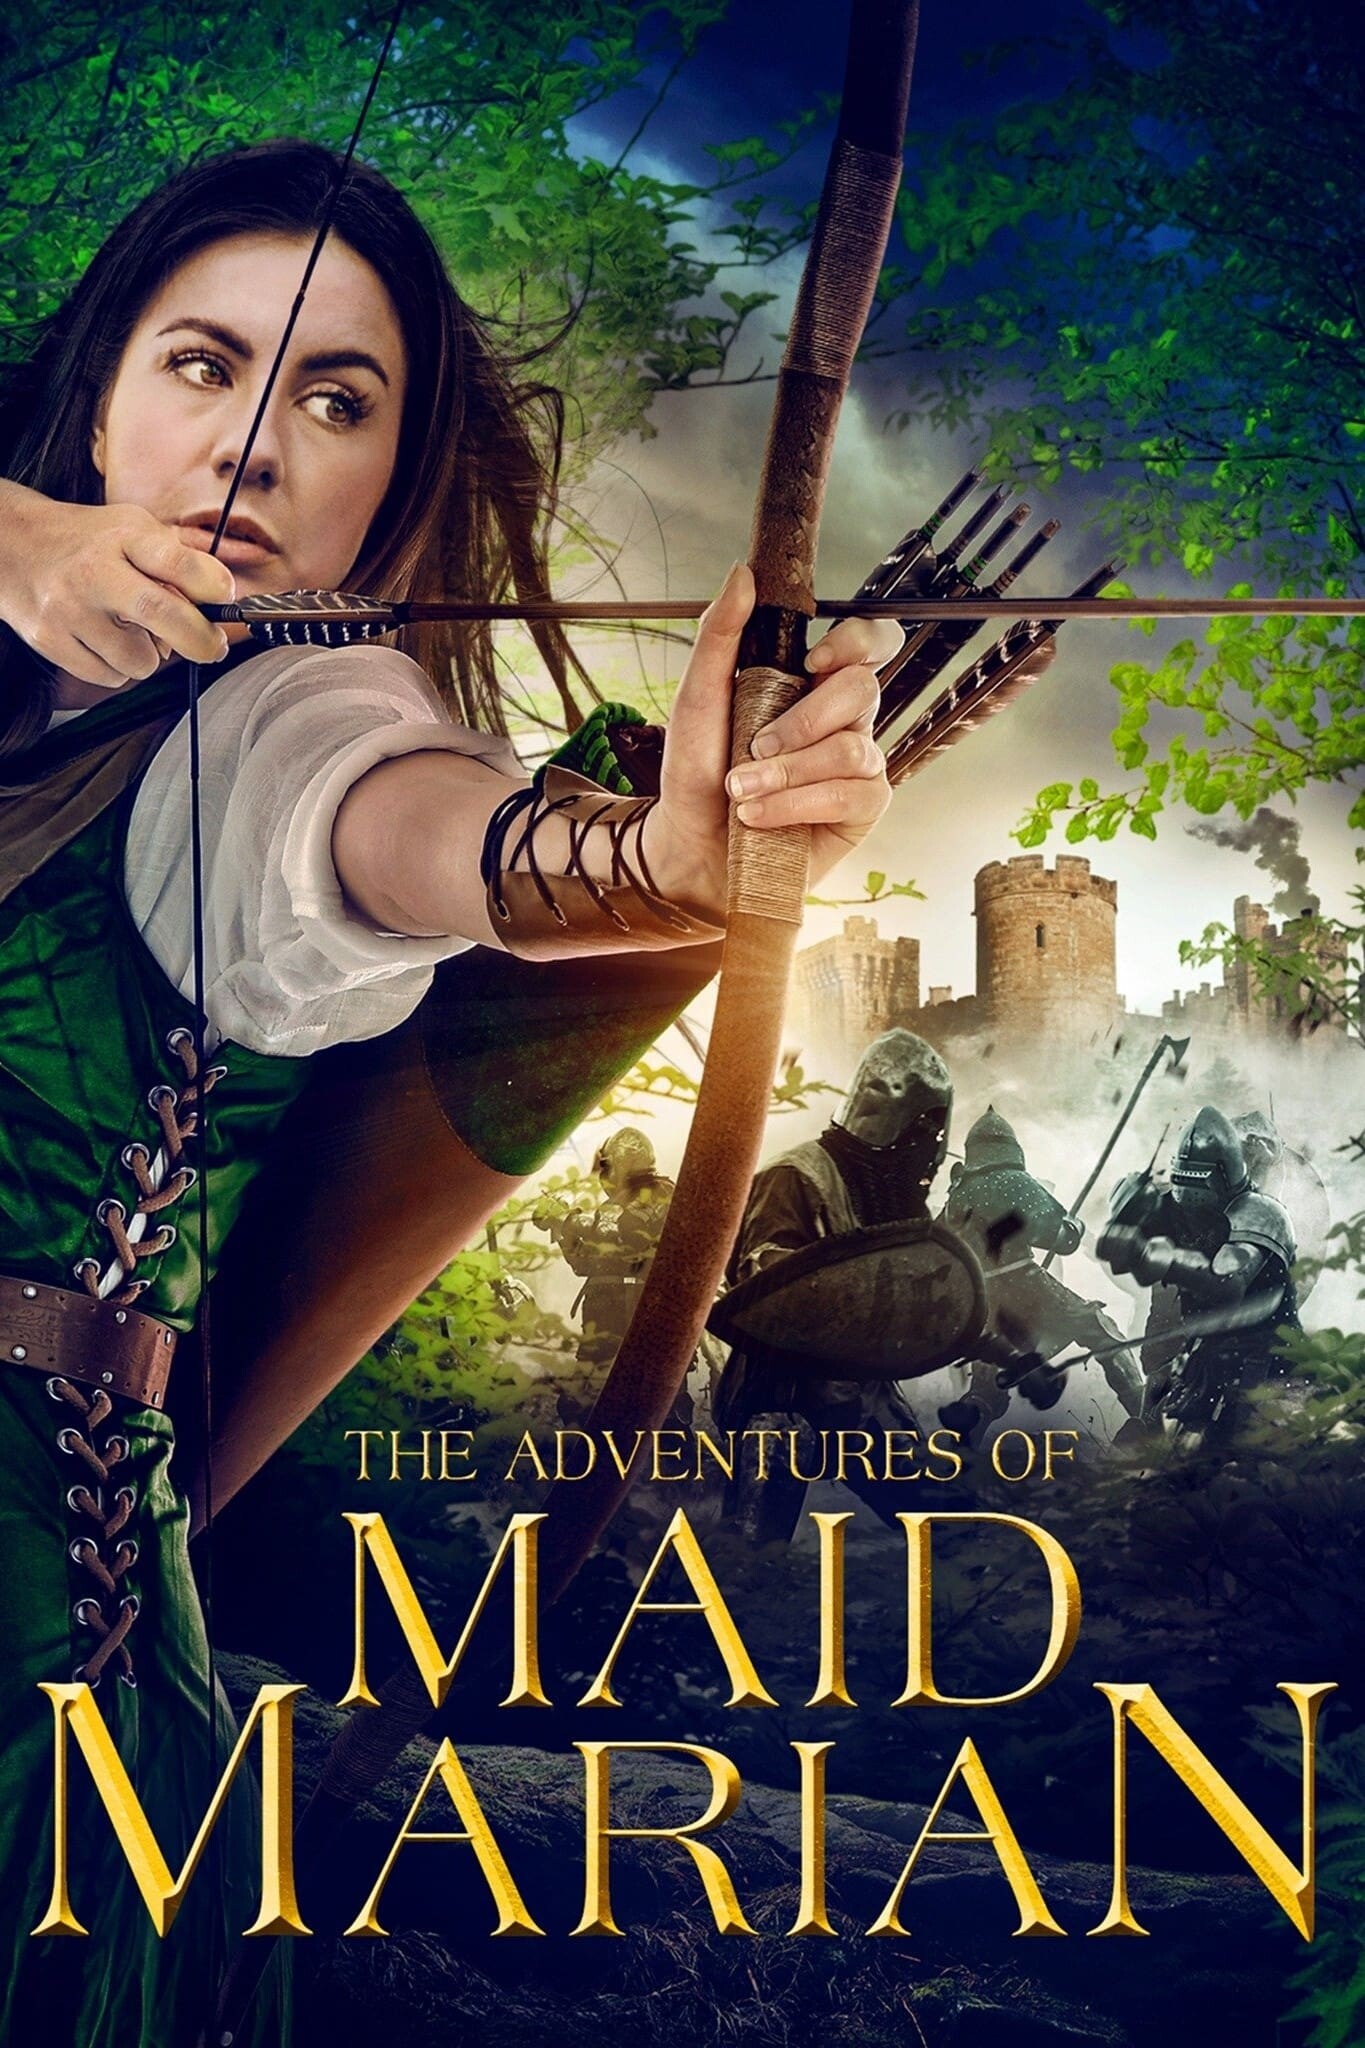 The Adventures of Maid Marian 2022 1080p Blu-ray Remux AVC DTS-HD MA 5 1-HDT